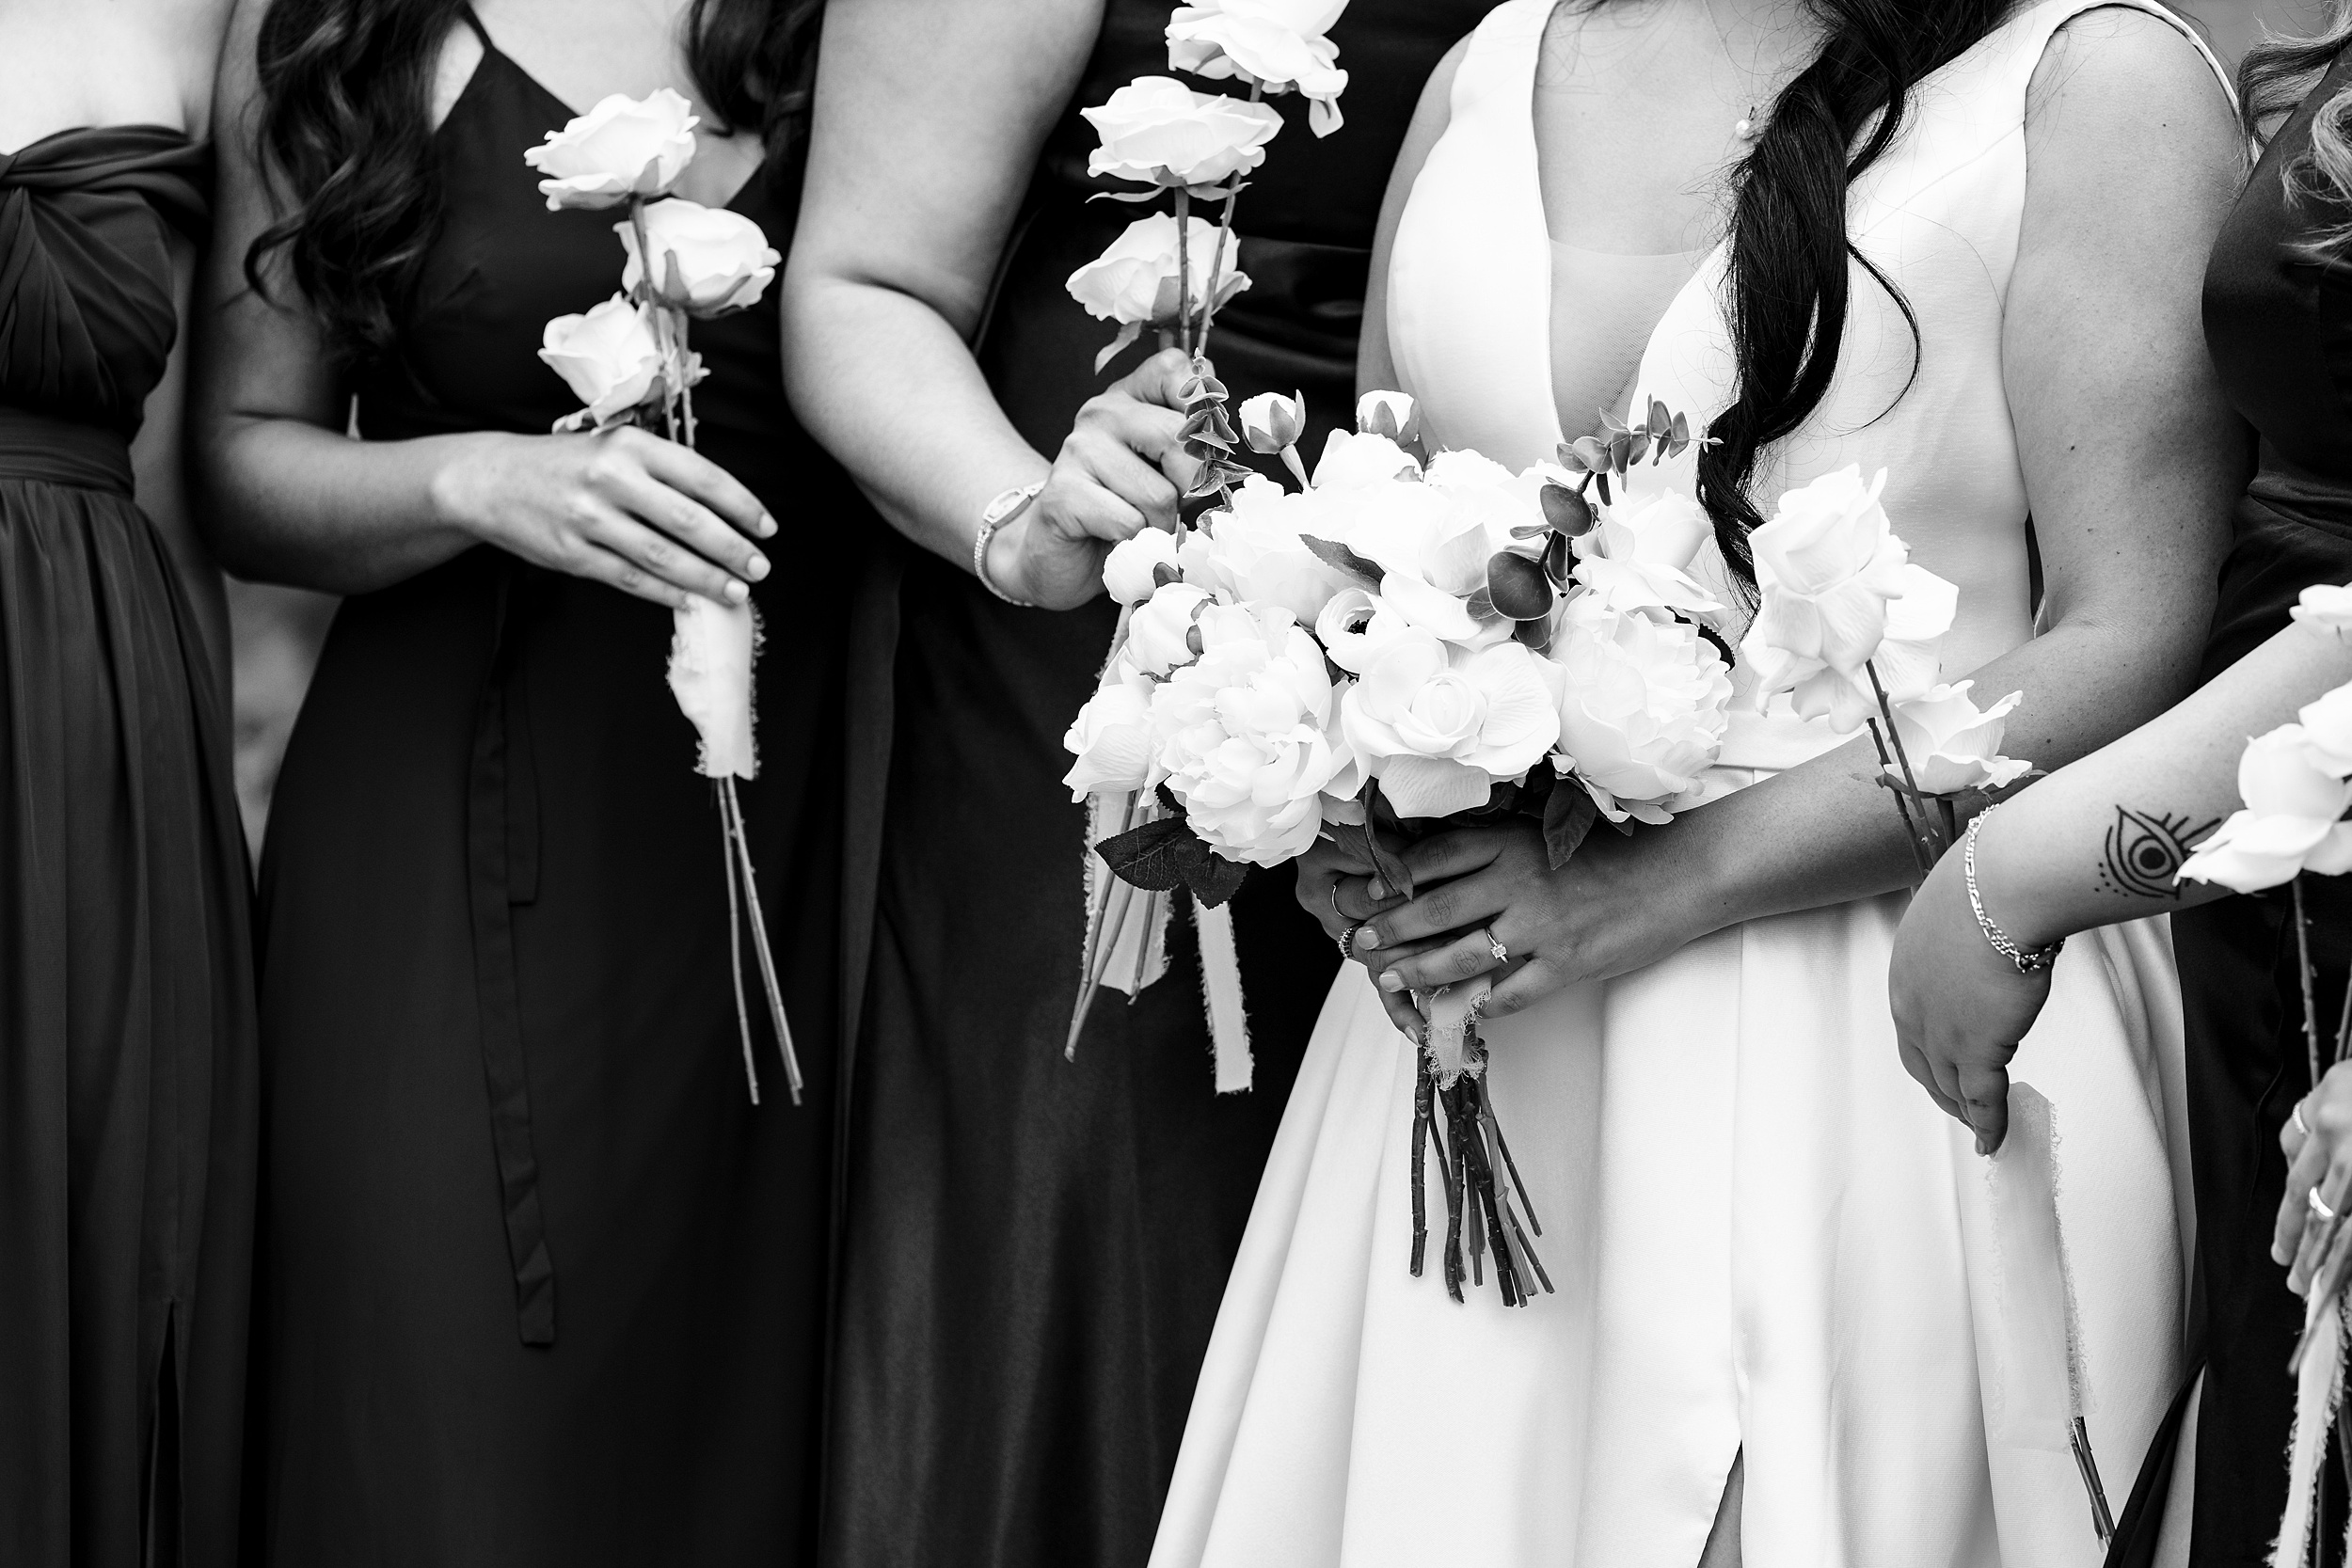 Details of a bride holding a bouquet of white roses while surrounded by her bridesmaids